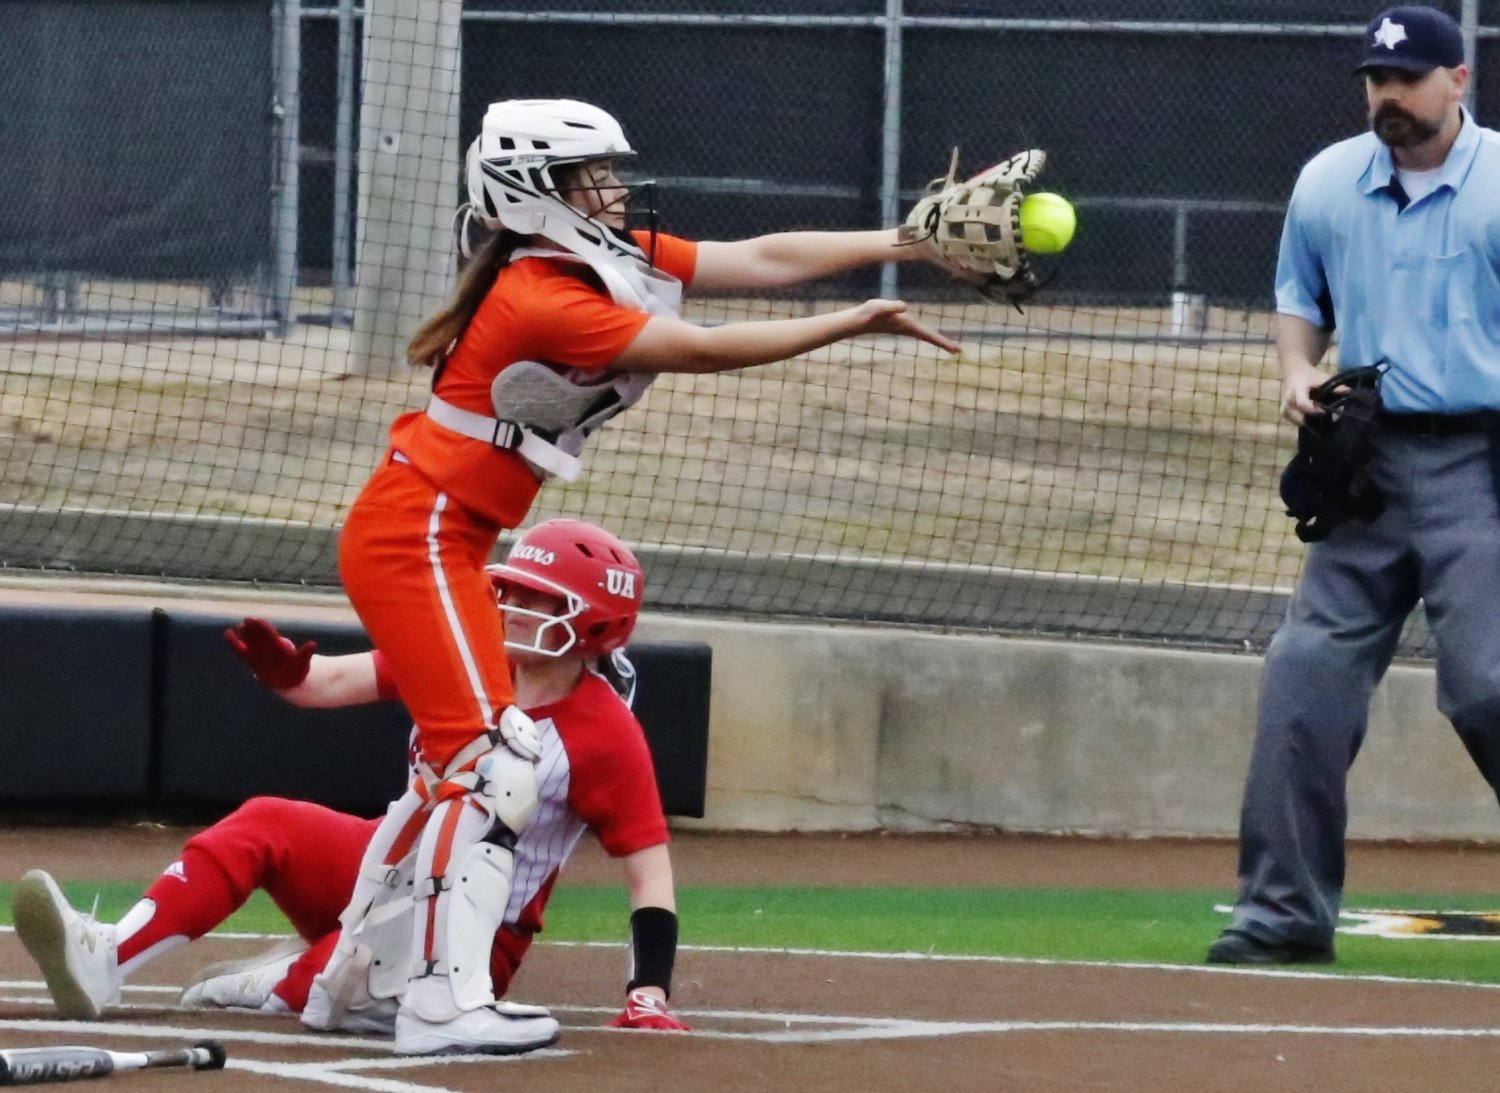 Lady Jacket catcher Jaycee Smith takes a throw at the plate in tournament action last Saturday.